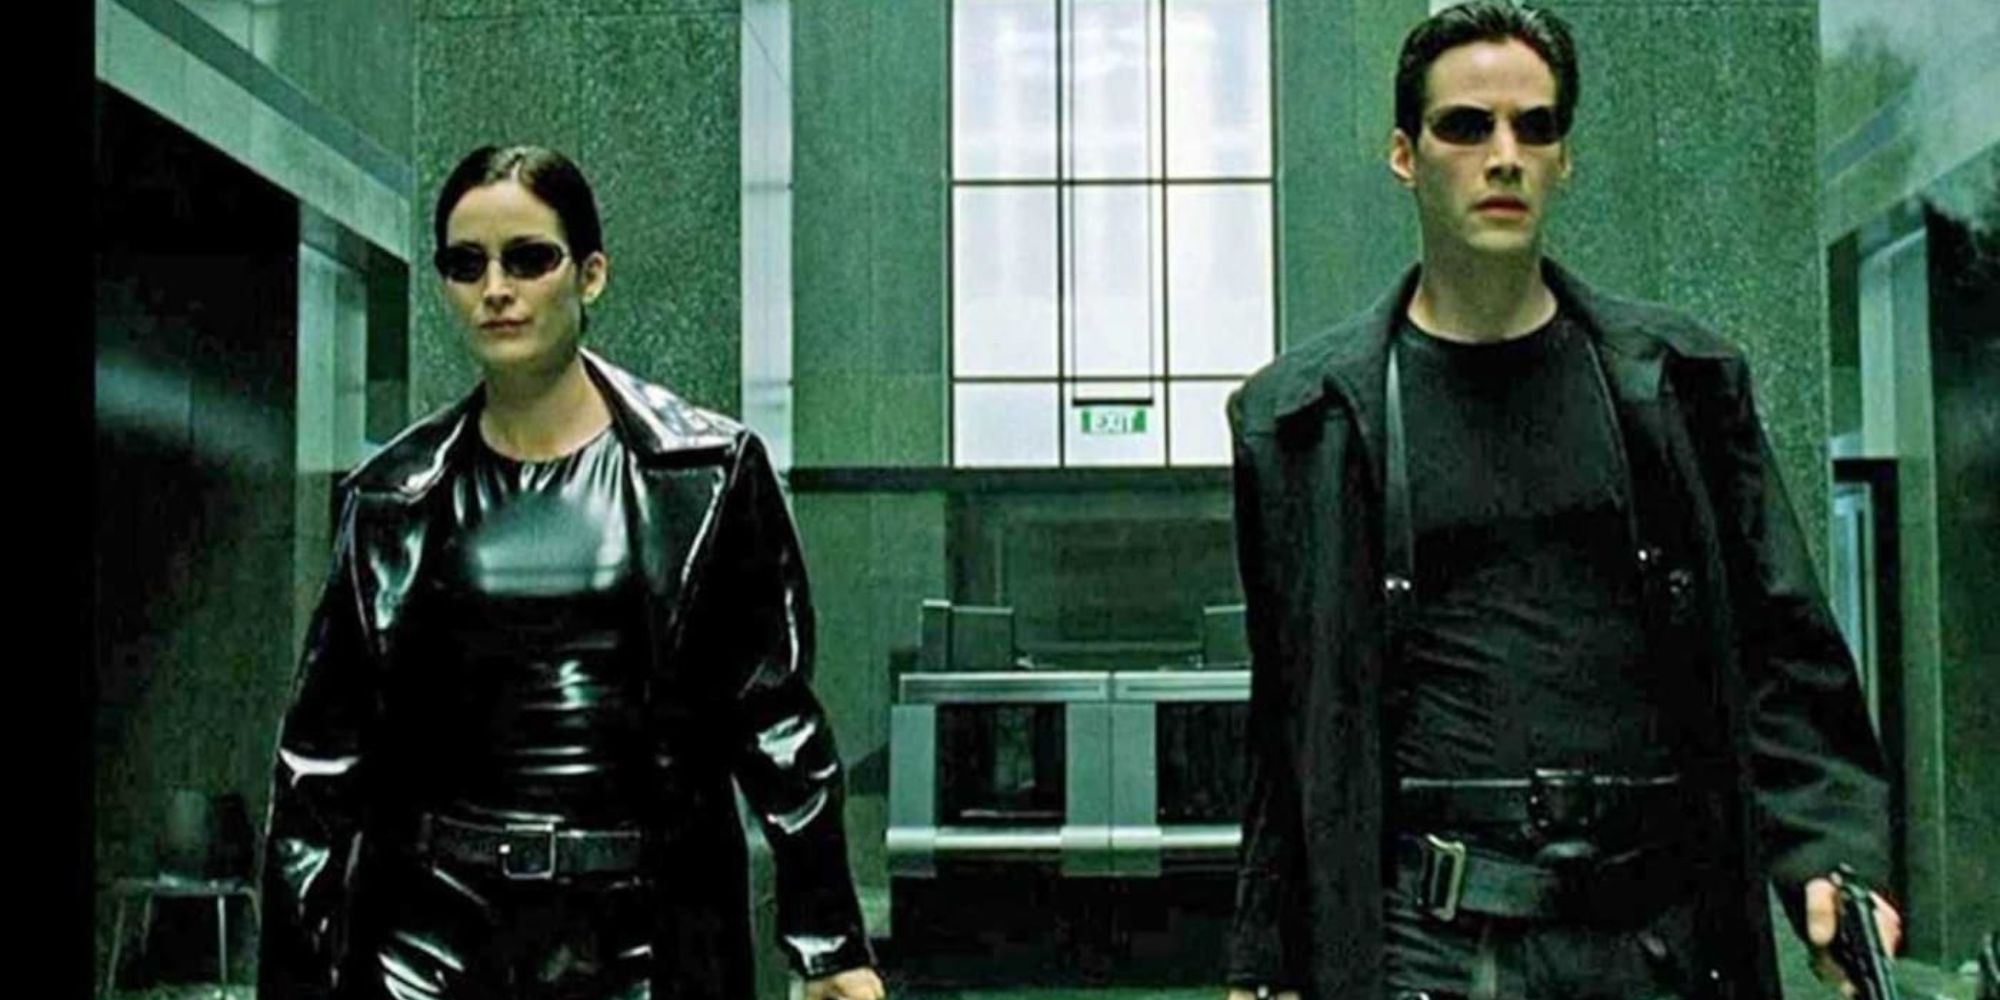 Keanu Reeves as Neo and Carrie-Ann Moss as Trinity walking in The Matrix.